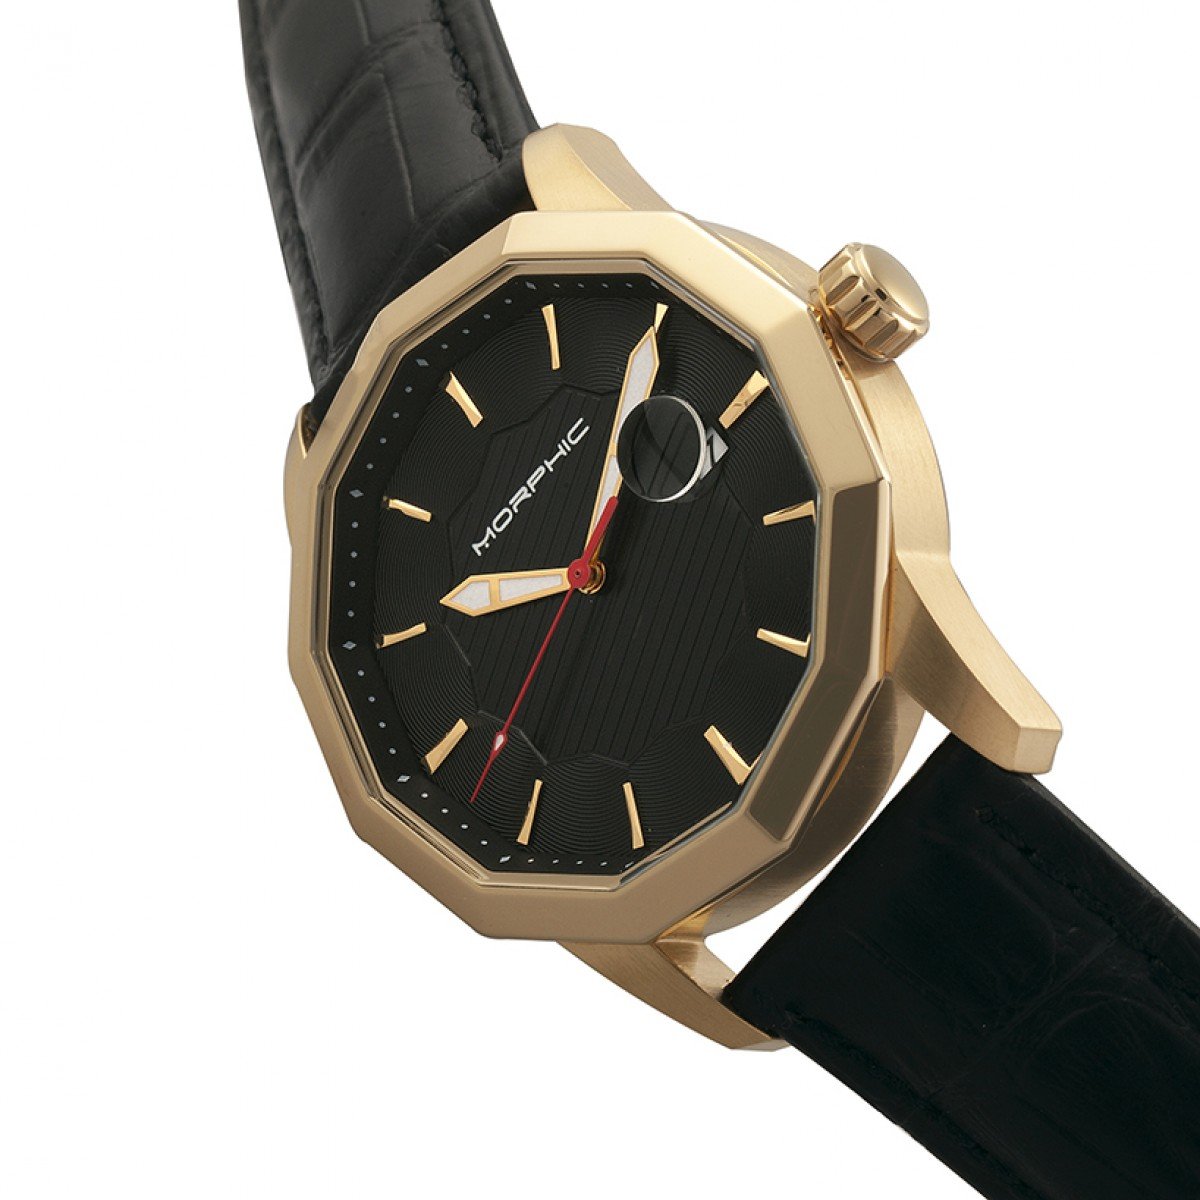 Morphic M56 Series Leather-Band Watch w/Date - Gold/Black - MPH5603